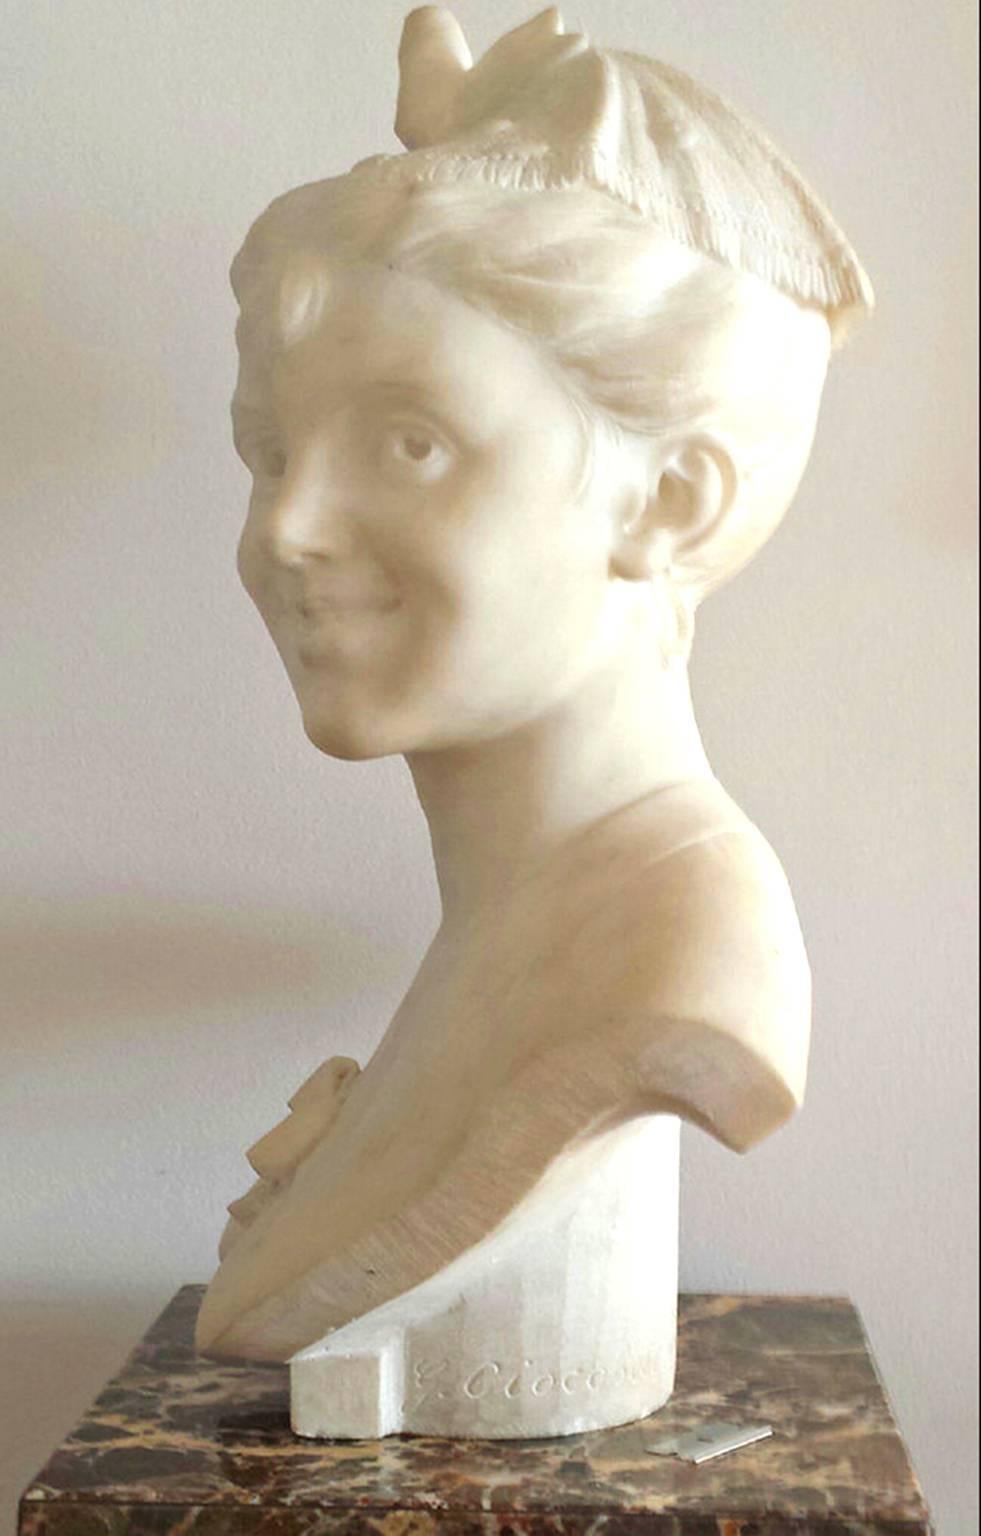  Portrait of a young girl - Academic Sculpture by Giuseppe Ciocchetti